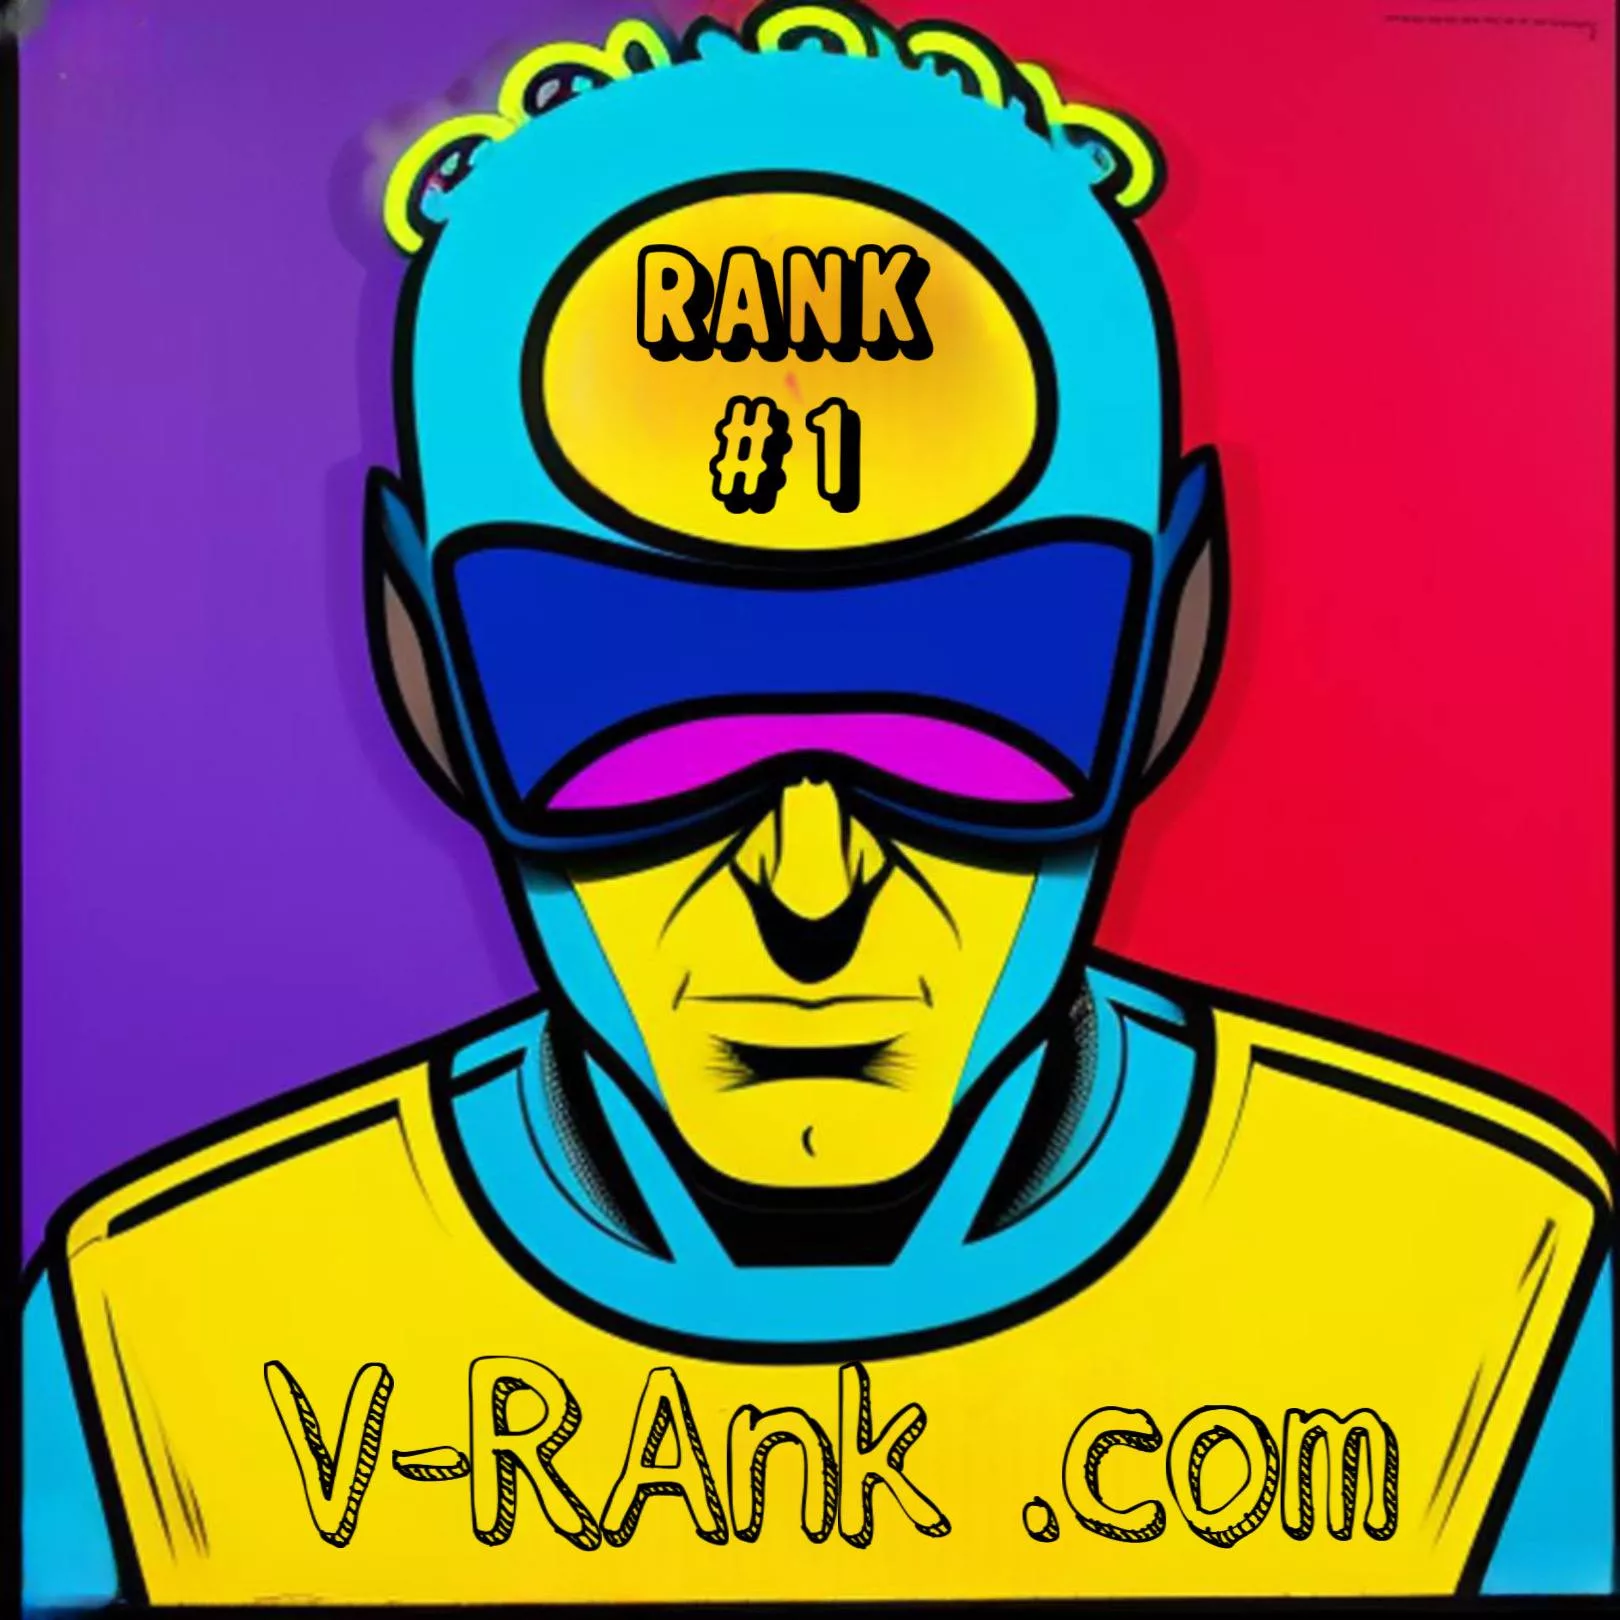 V-rank or how to rank your videos